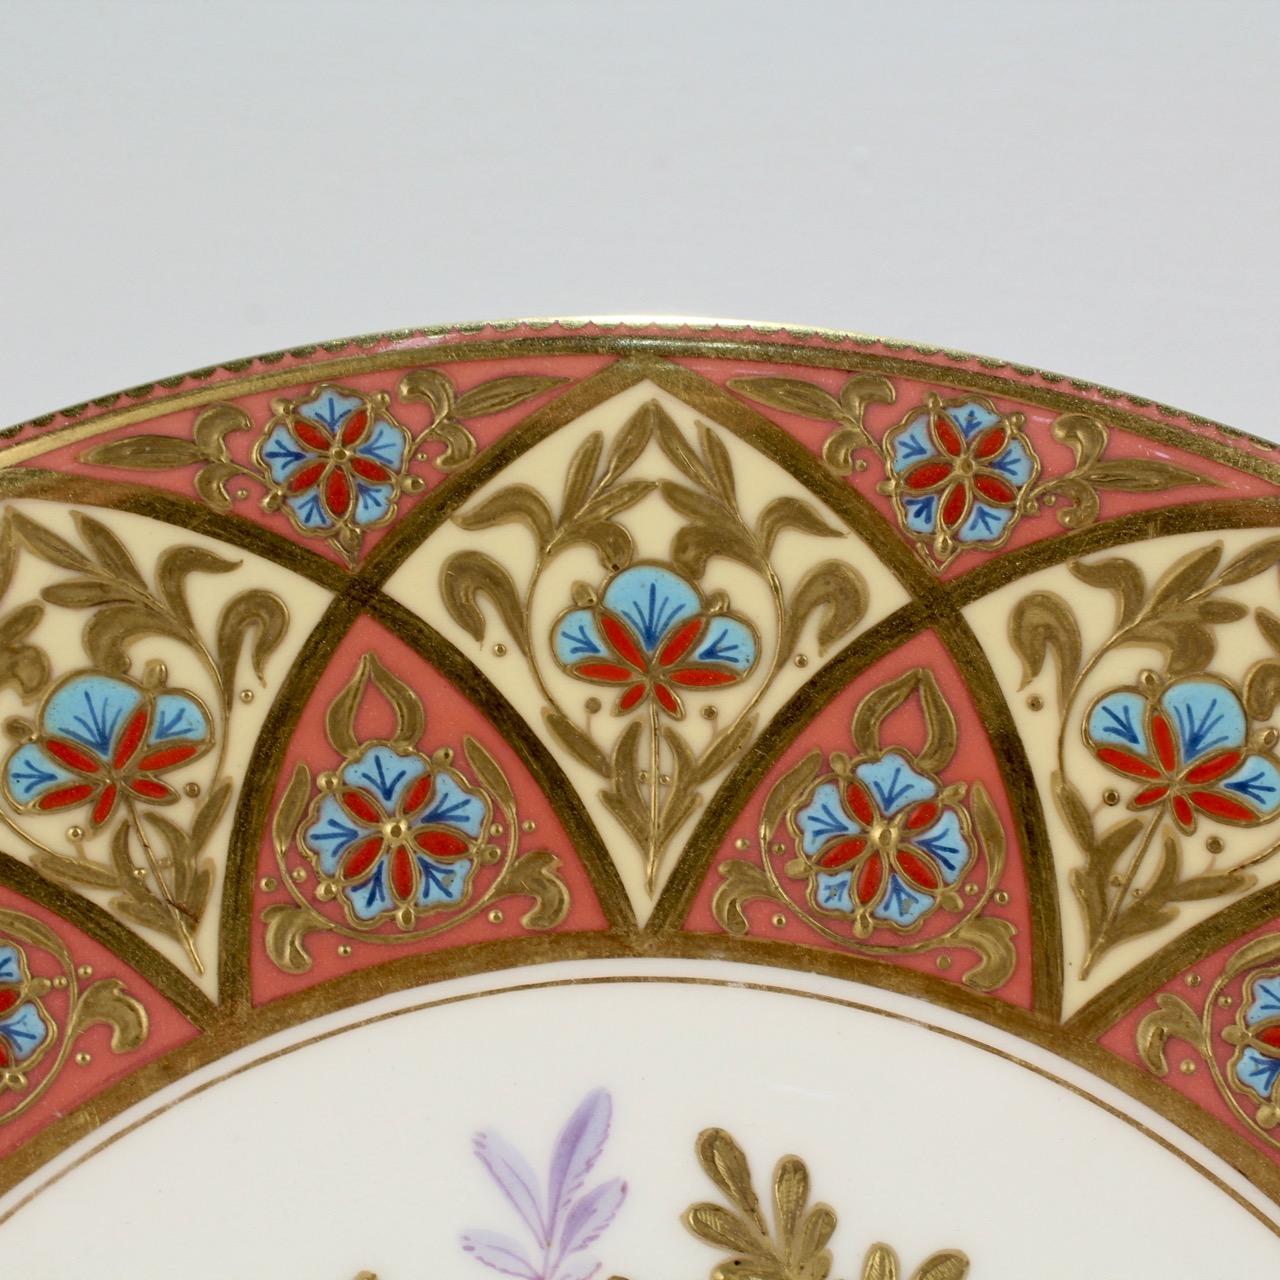 Derby Porcelain Aesthetic Period Gilt and Enameled Botanical Cabinet Plate Pair For Sale 1